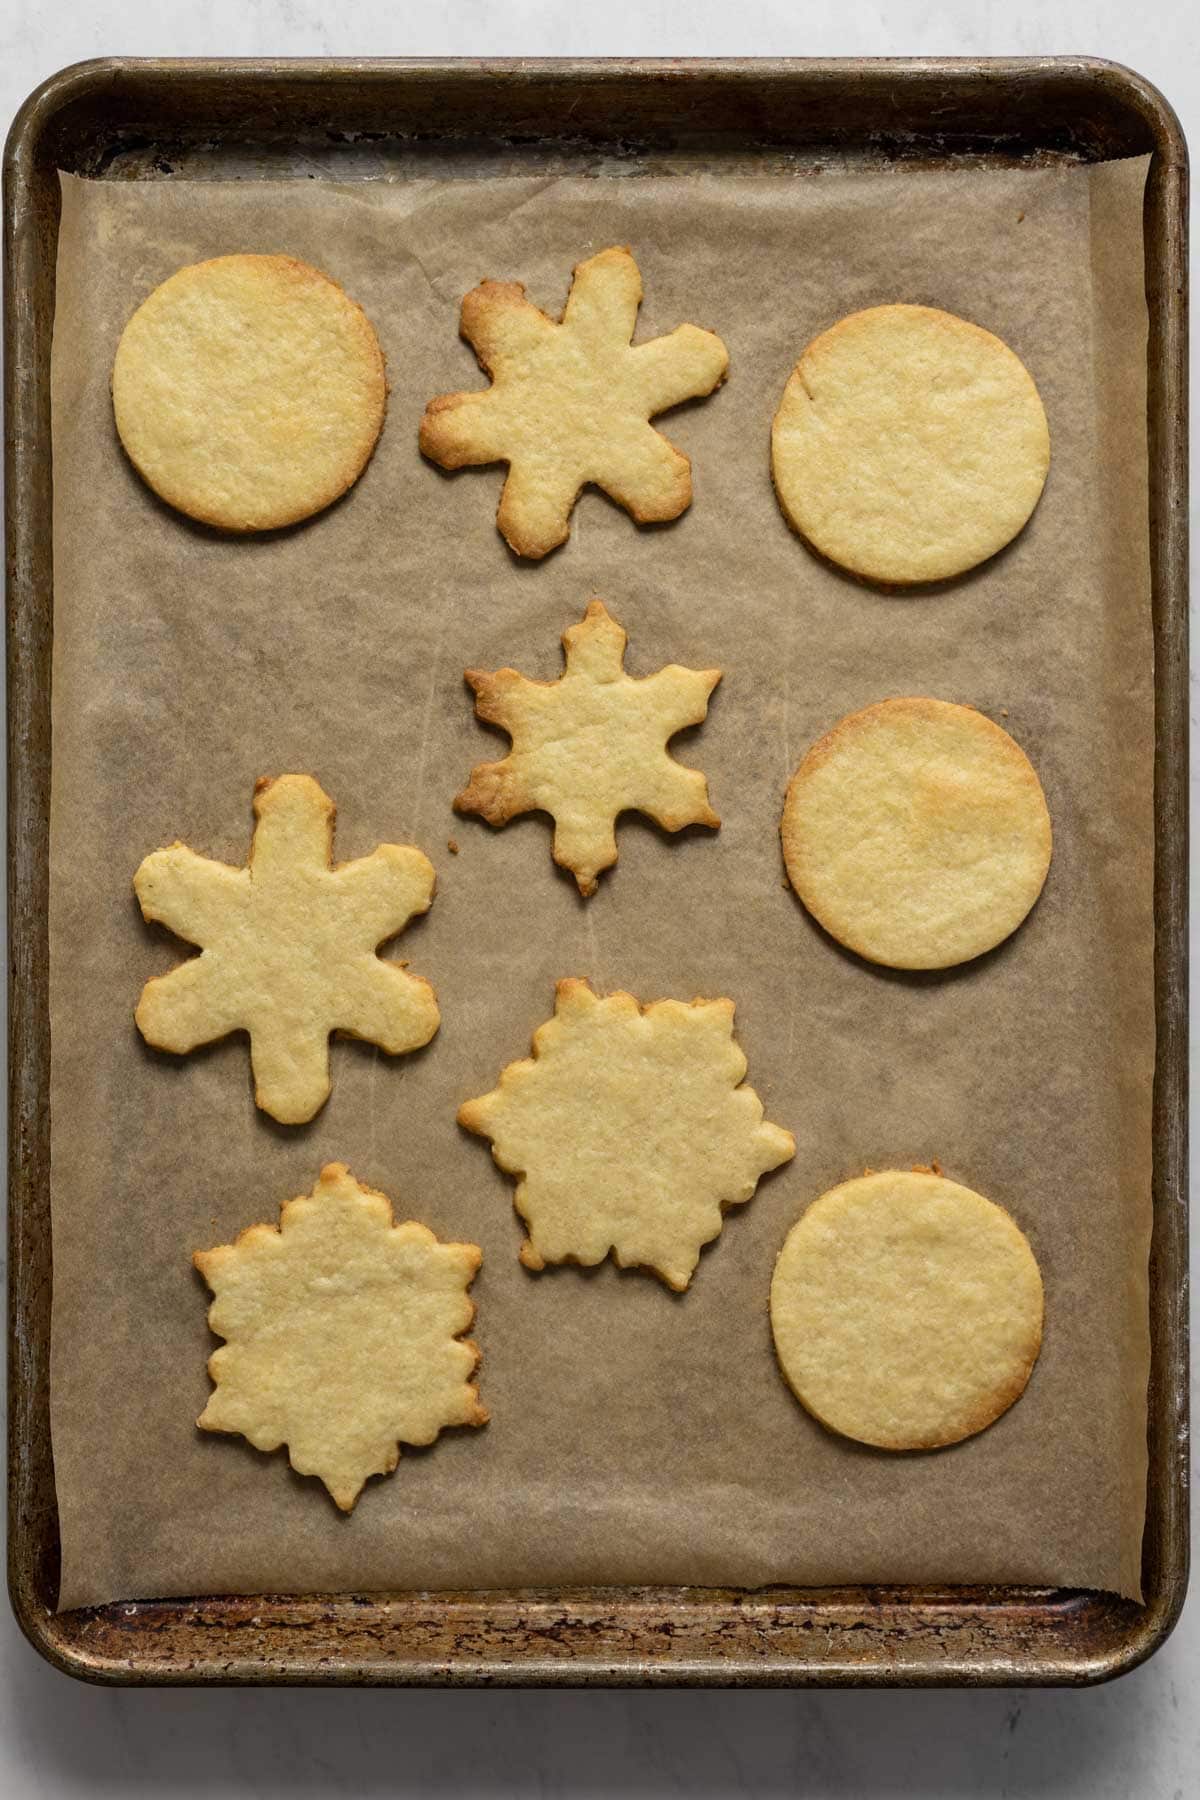 Baked almond shortbread cookies on a sheet pan